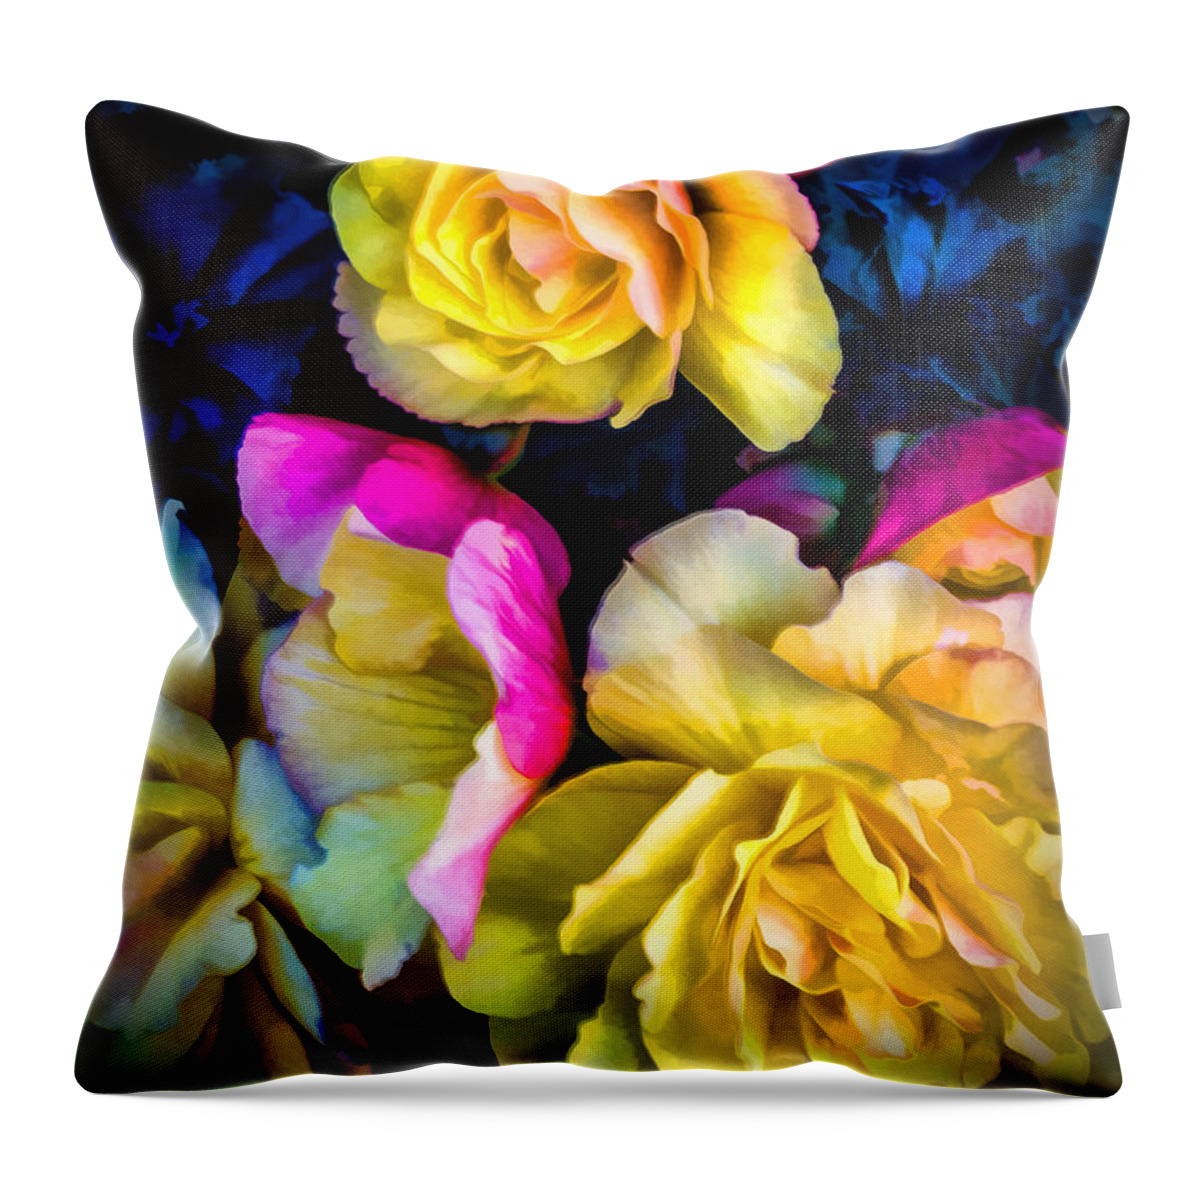 Flower Pictures Throw Pillow featuring the digital art Vancouver Island Roses by Georgianne Giese